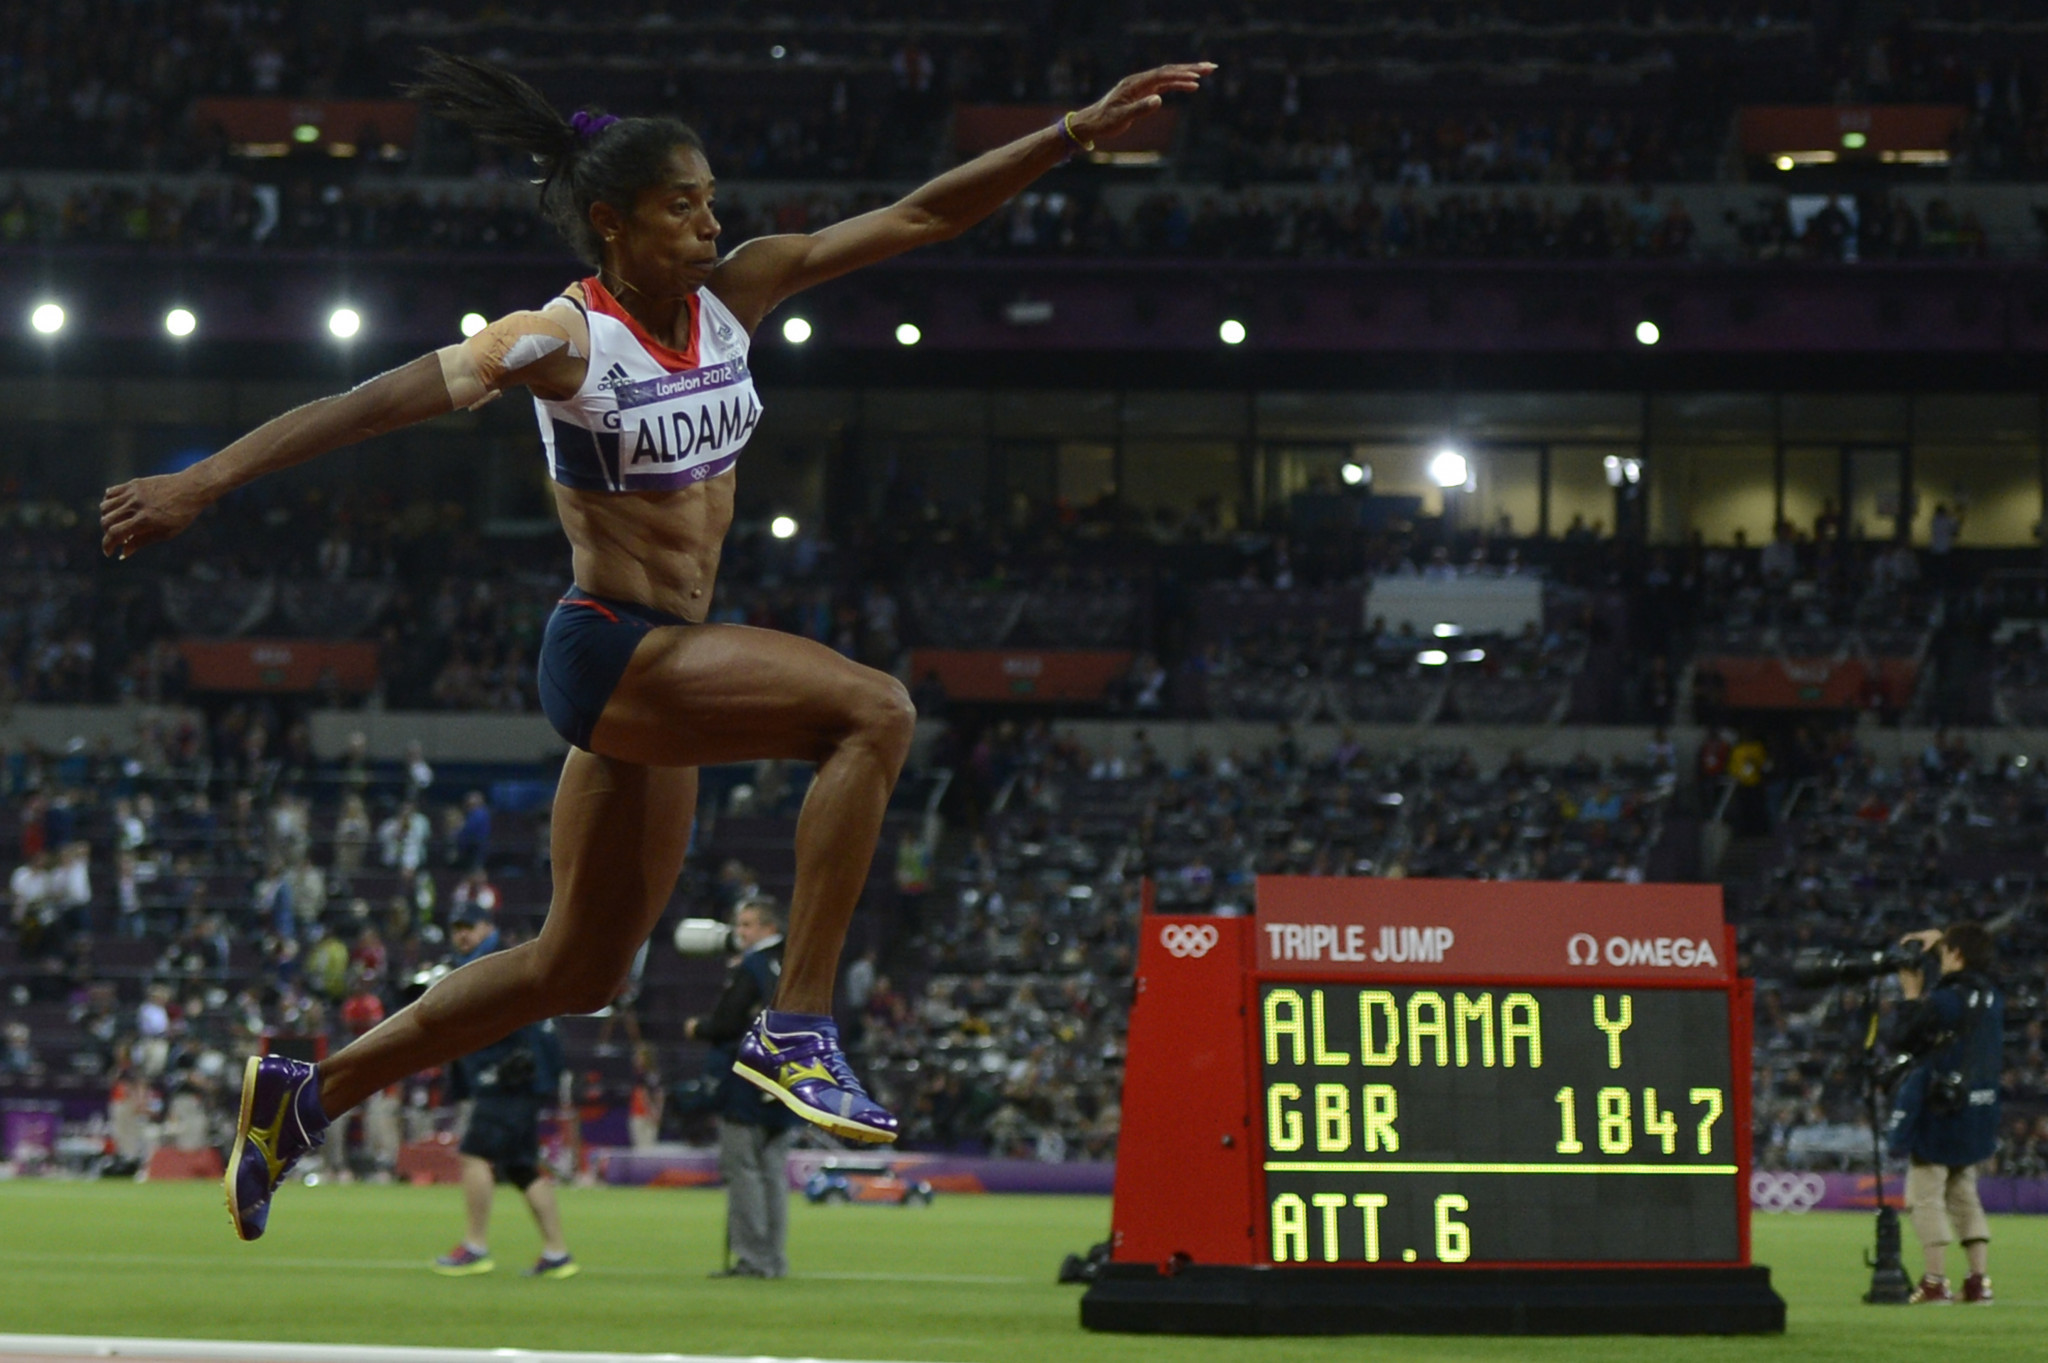 Triple jumper Yamilé Aldama for Cuba, Sudan and Britain is one of the few athletes who has competed for three different countries at the Olympic Games  ©Getty Images